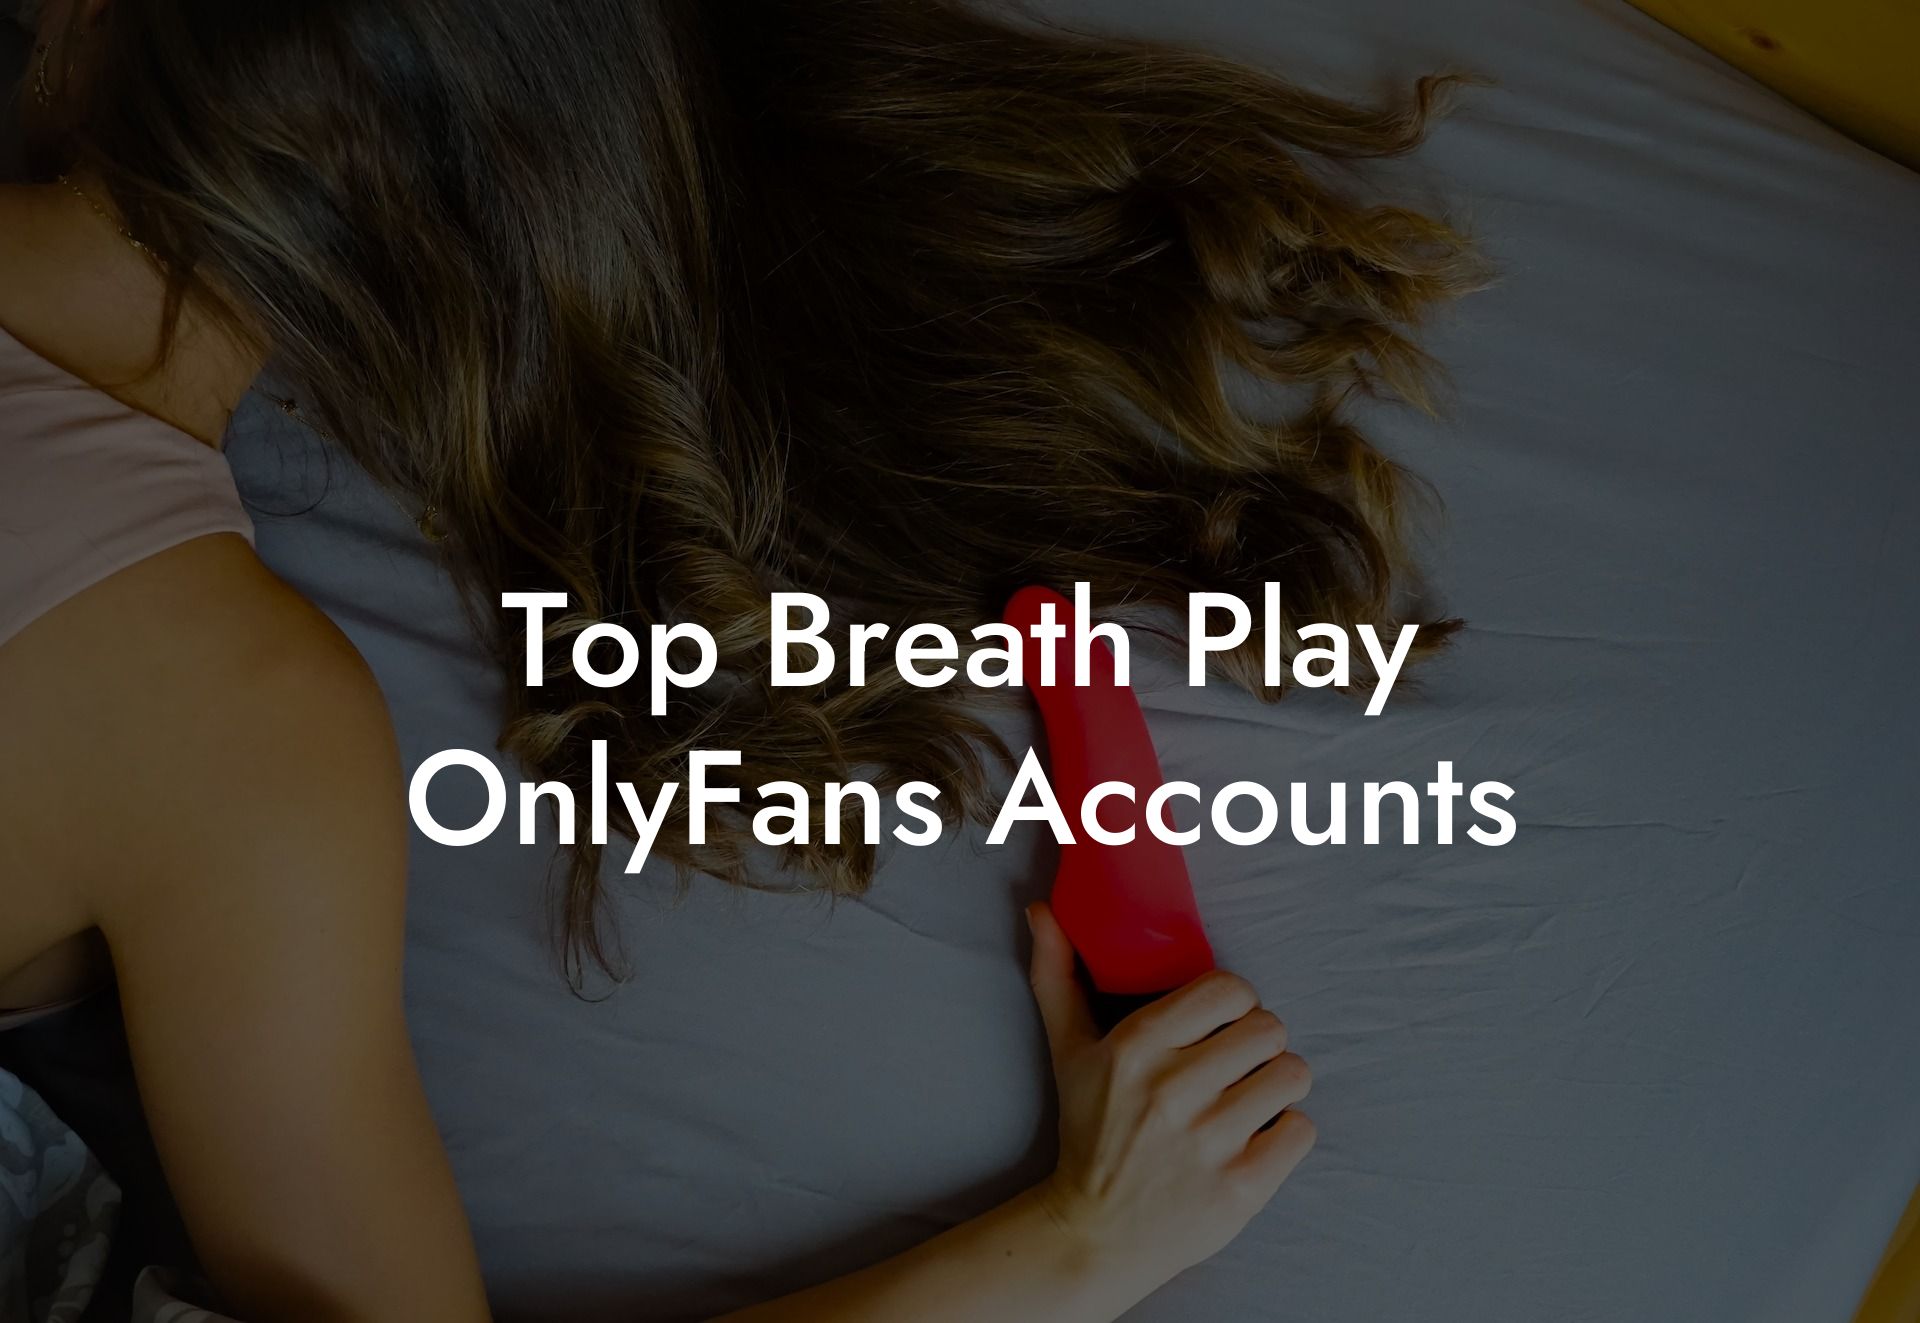 Top Breath Play OnlyFans Accounts